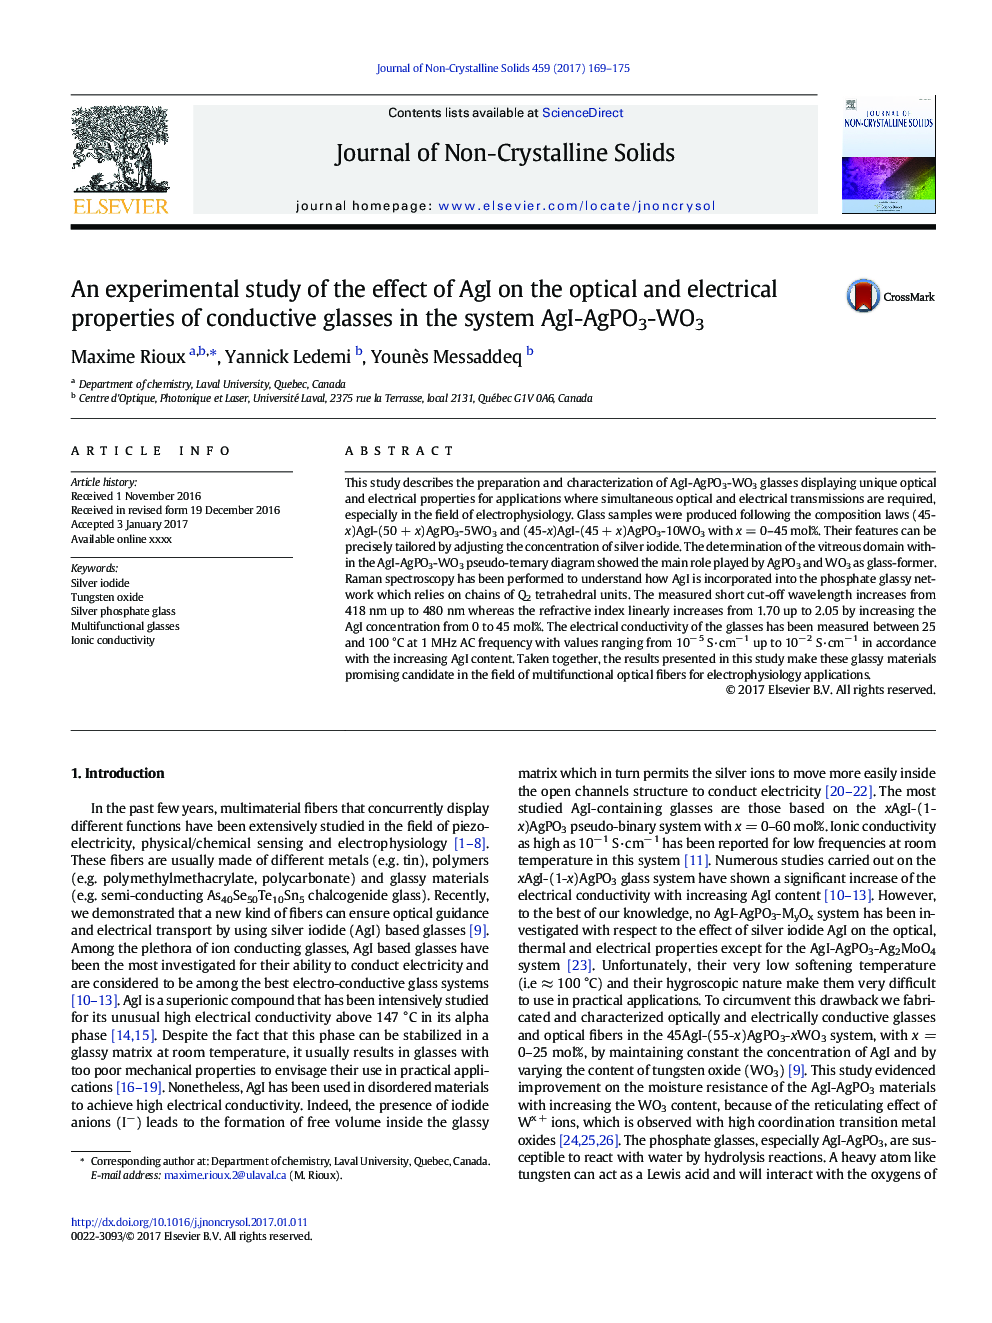 An experimental study of the effect of AgI on the optical and electrical properties of conductive glasses in the system AgI-AgPO3-WO3